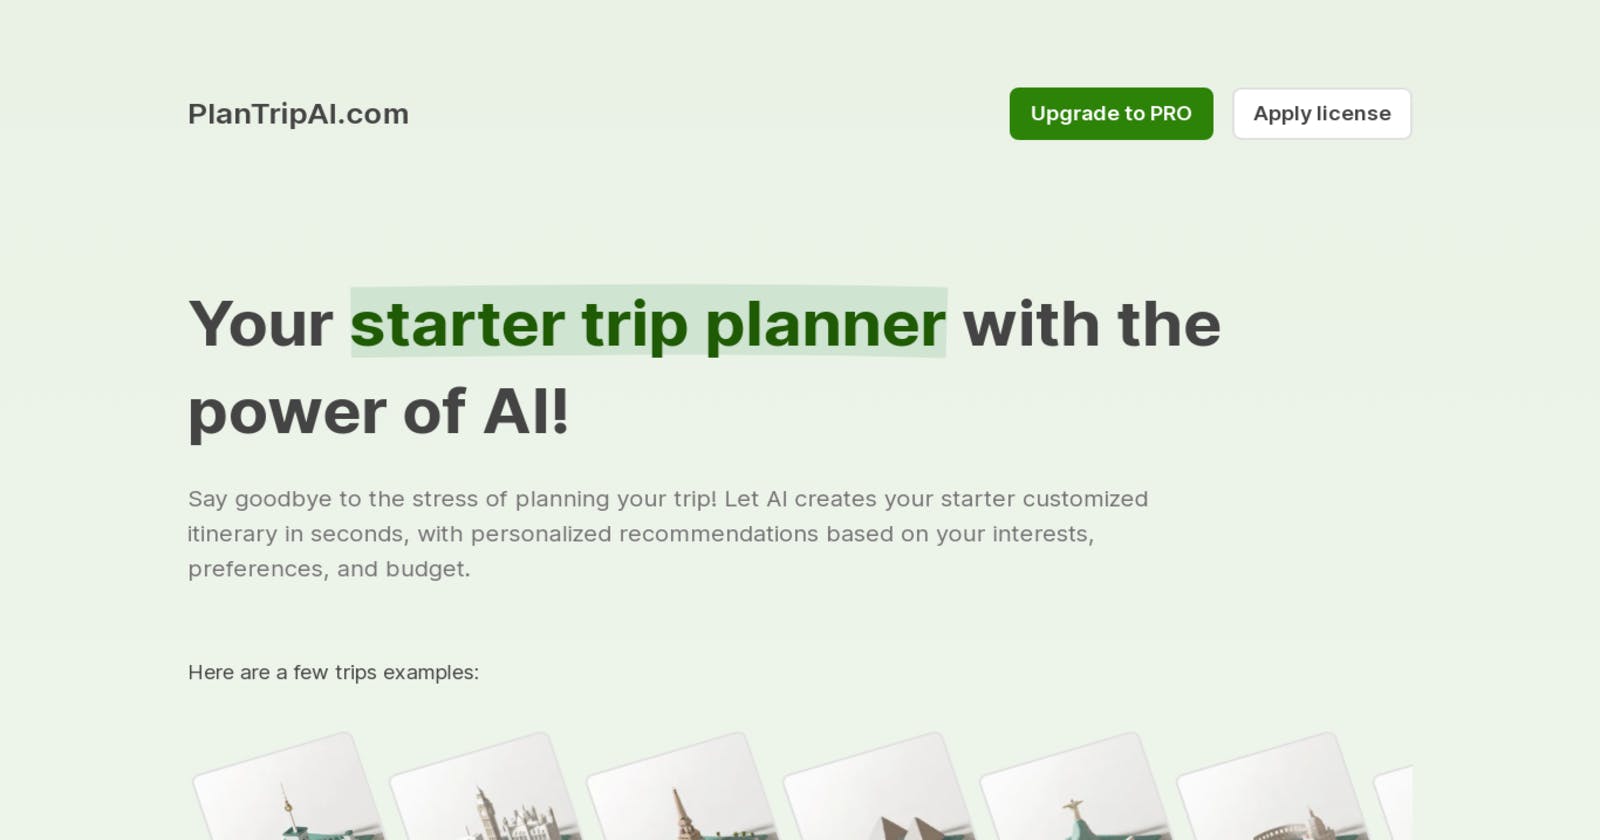 Plan Trip AI - The ultimate trip planner empowered by AI!